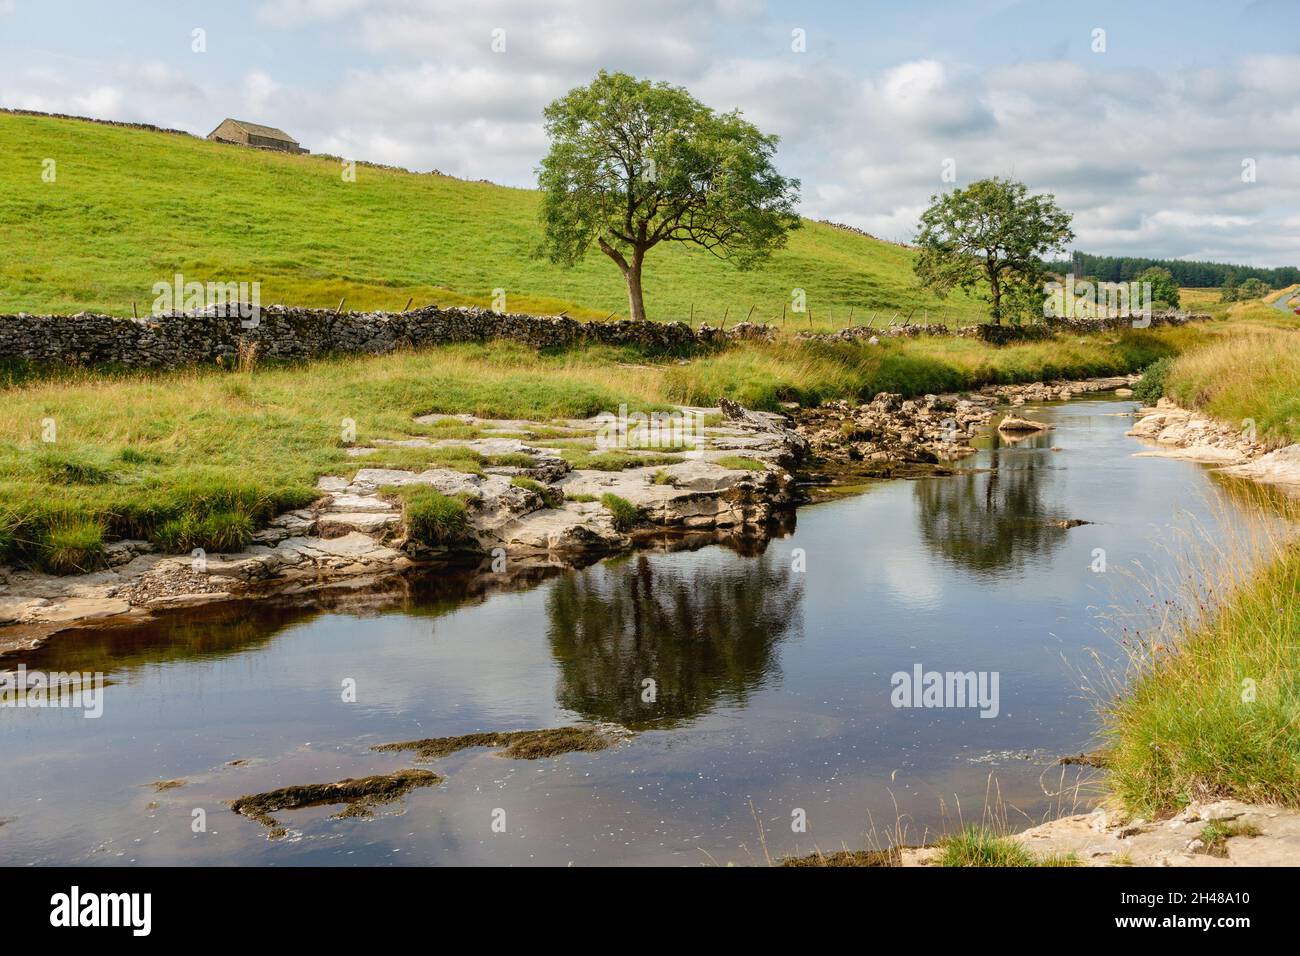 View up the River Wharfe in Langstrothdale, near its source, Yorkshire Dales National Park, UK landscape Stock Photo